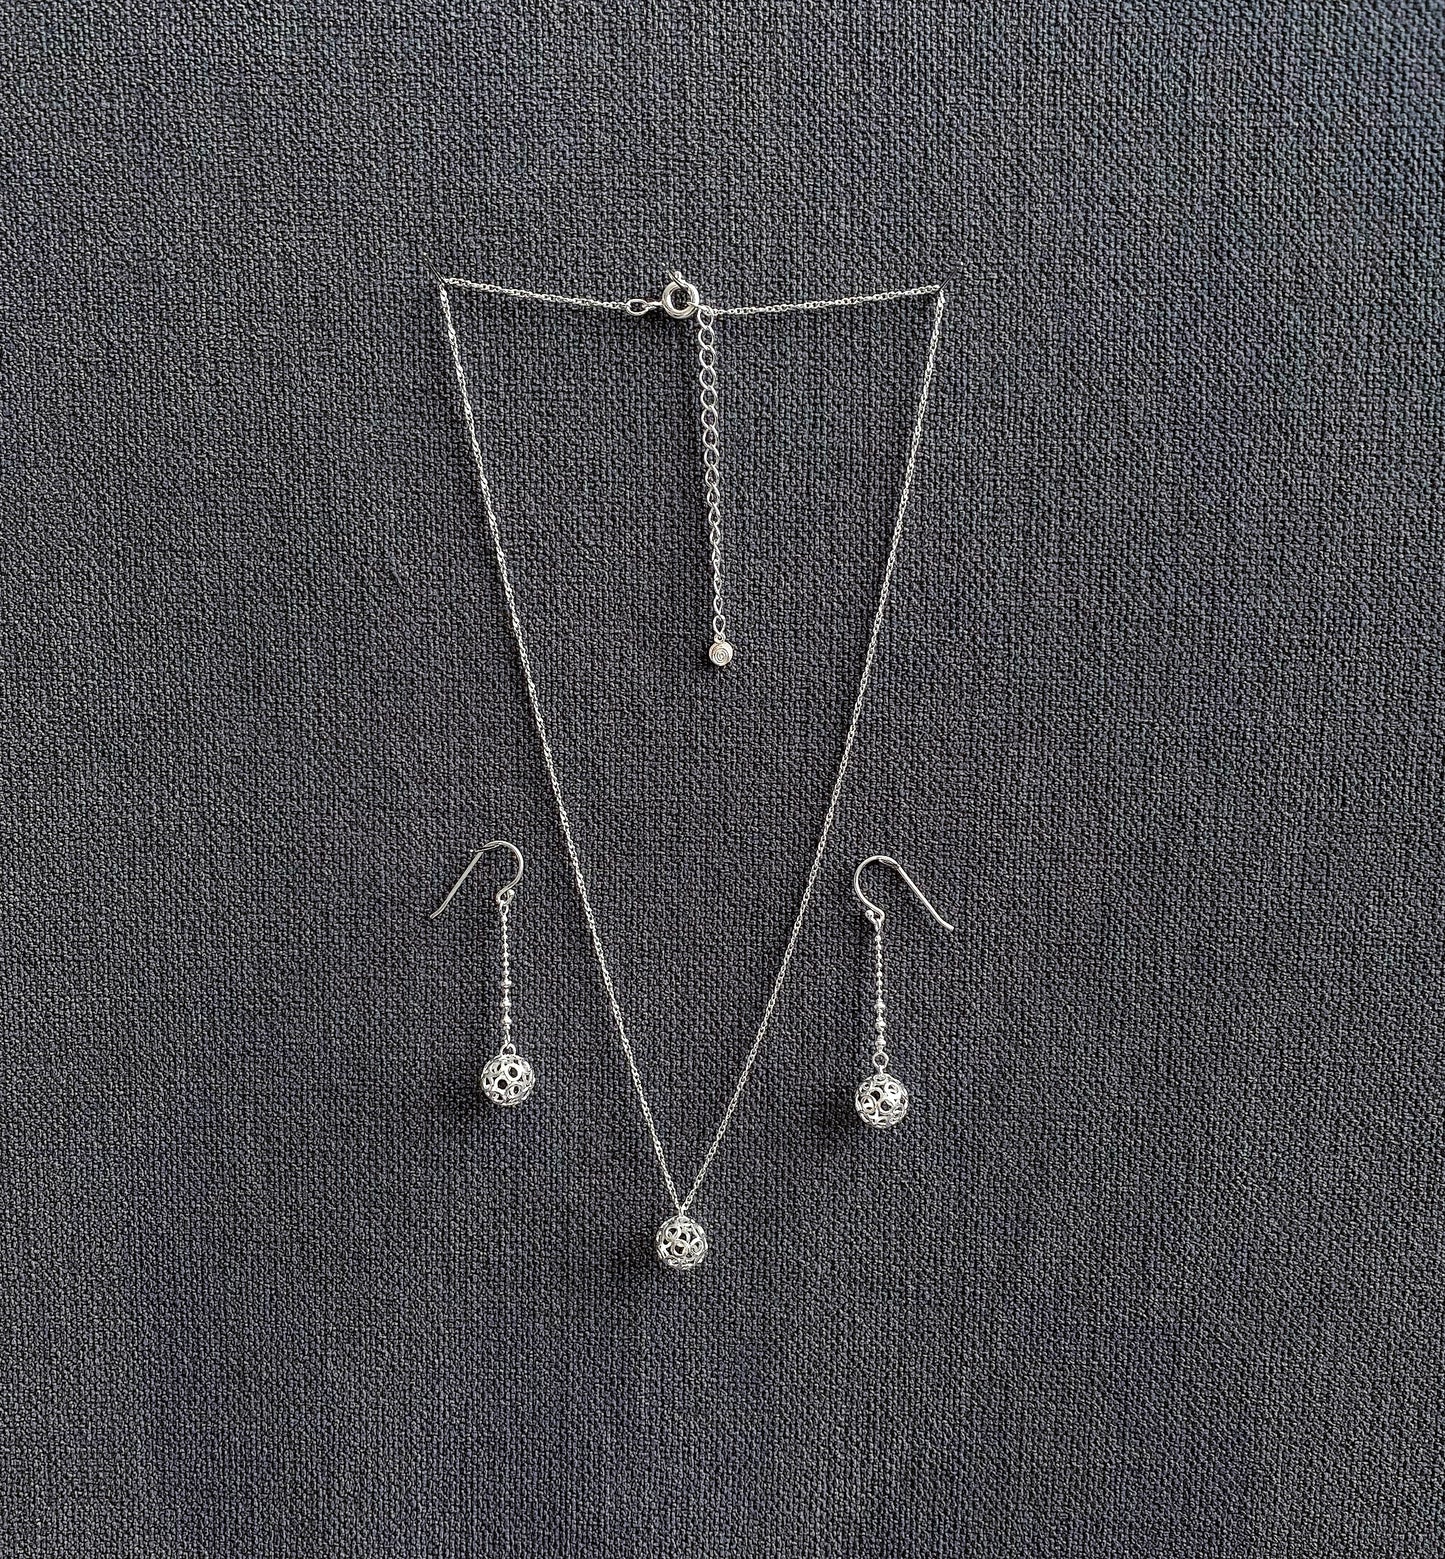 【5% OFF Price】Set of Small Ball Necklace and Earrings